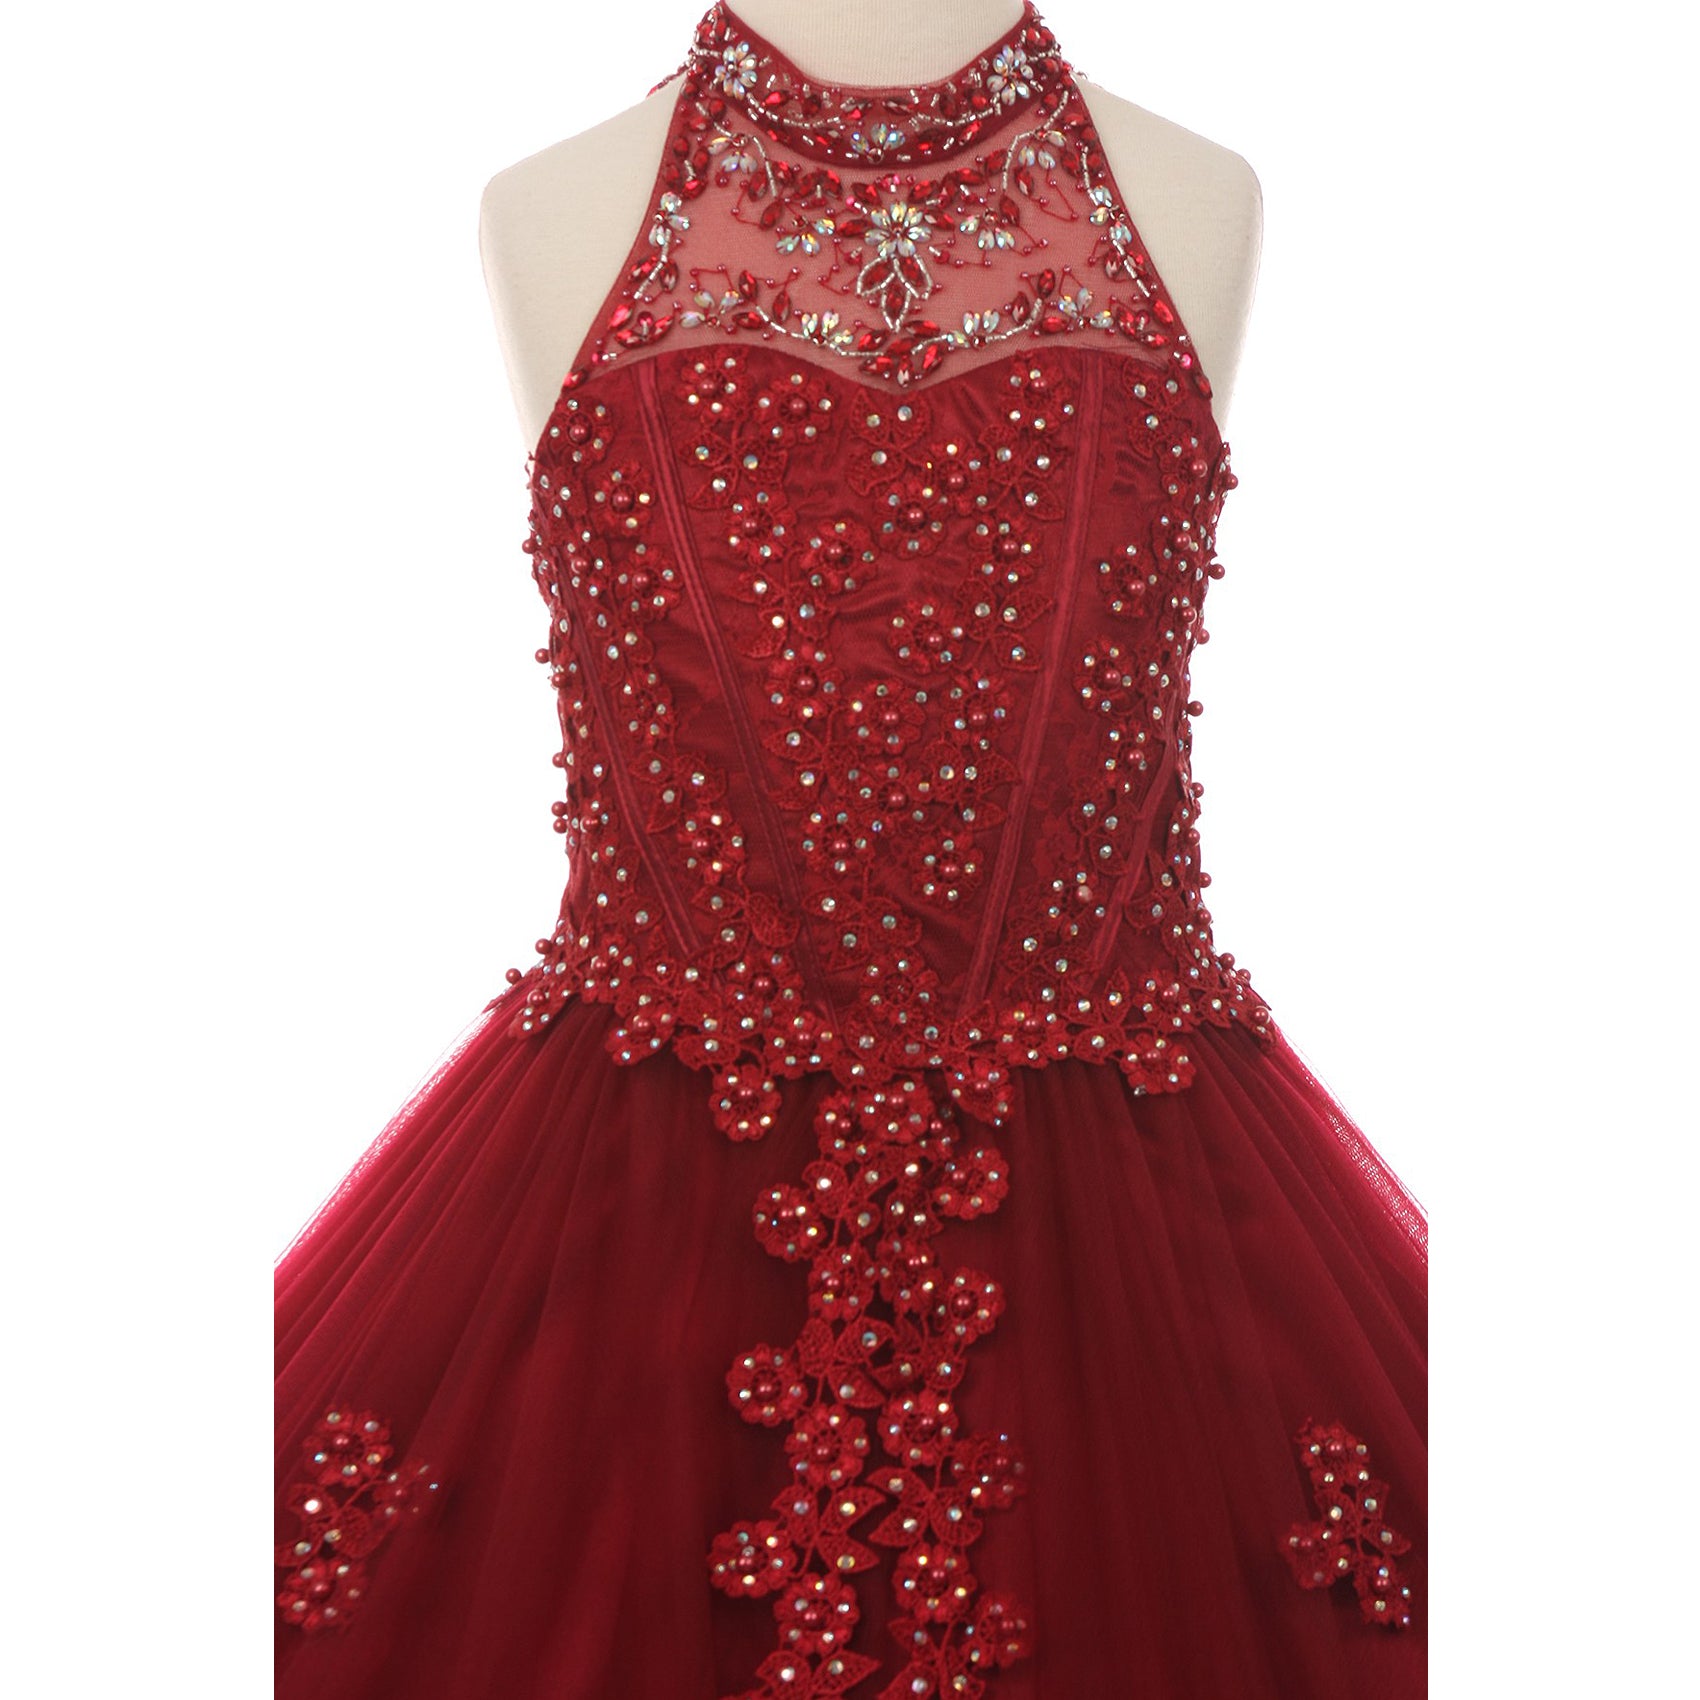 FULL LENGTH HALTER NECK DRESS WITH RHINESTONES AND PEARLS BODICE